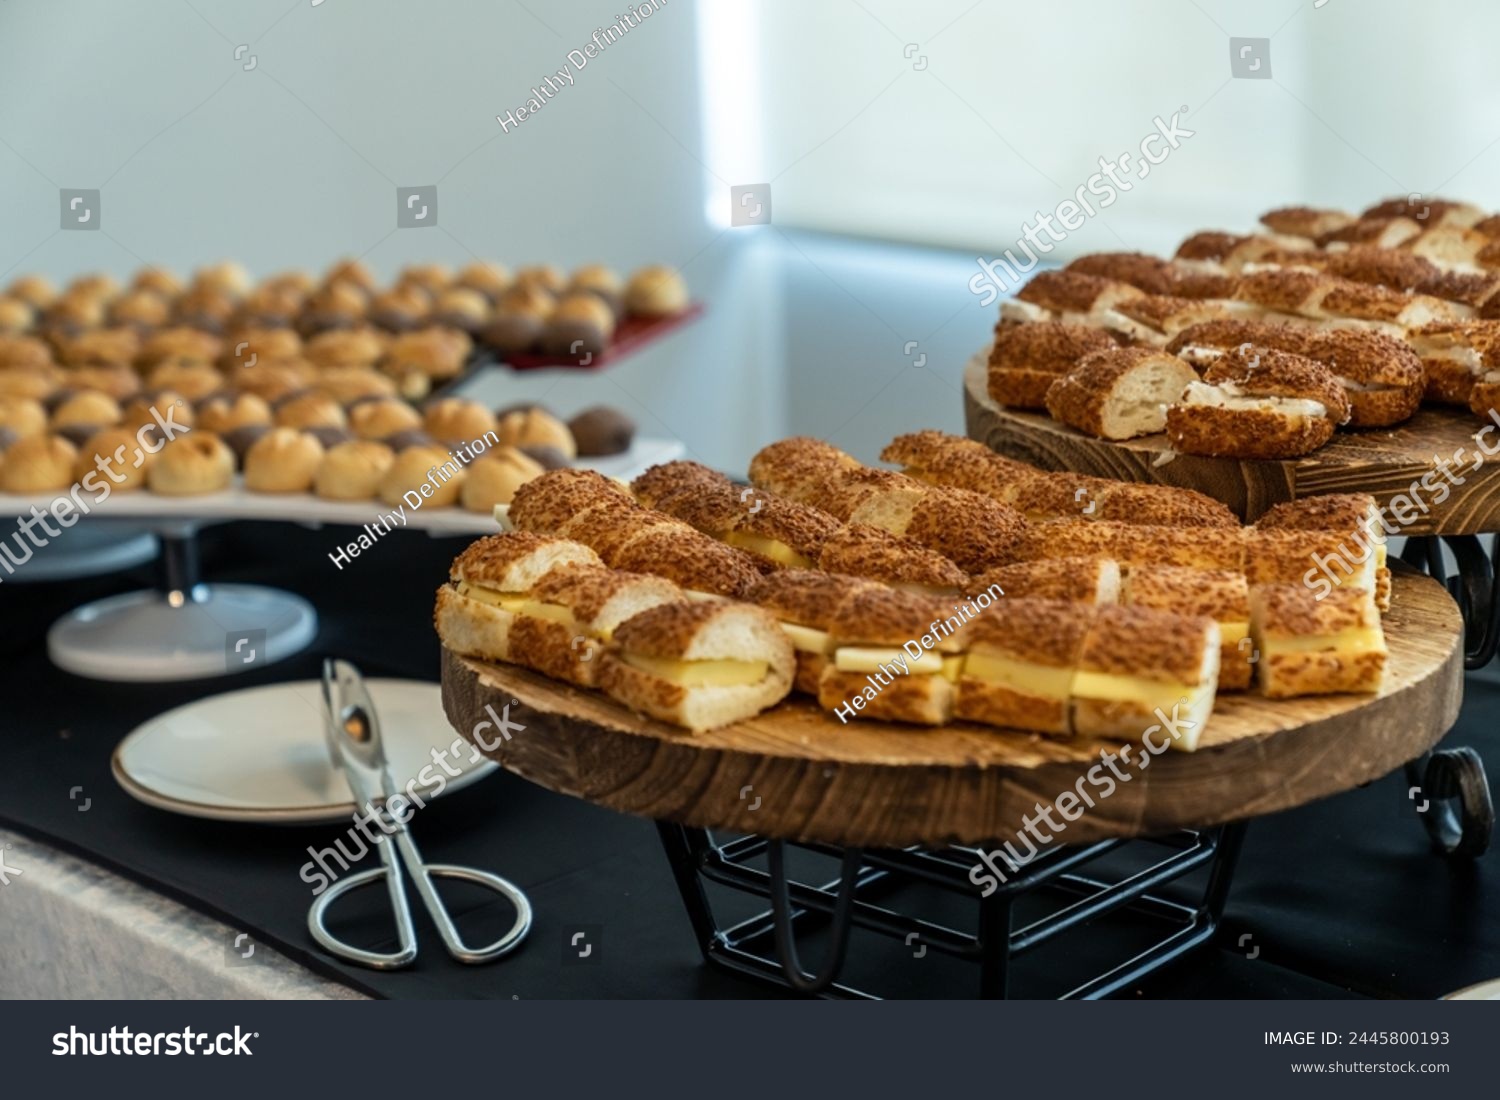 coffee break hotel during conference meeting, corporate revent with tea and coffee catering, decorated catering banquet table with variety of different pastry and bakery, with croissants and cookies #2445800193